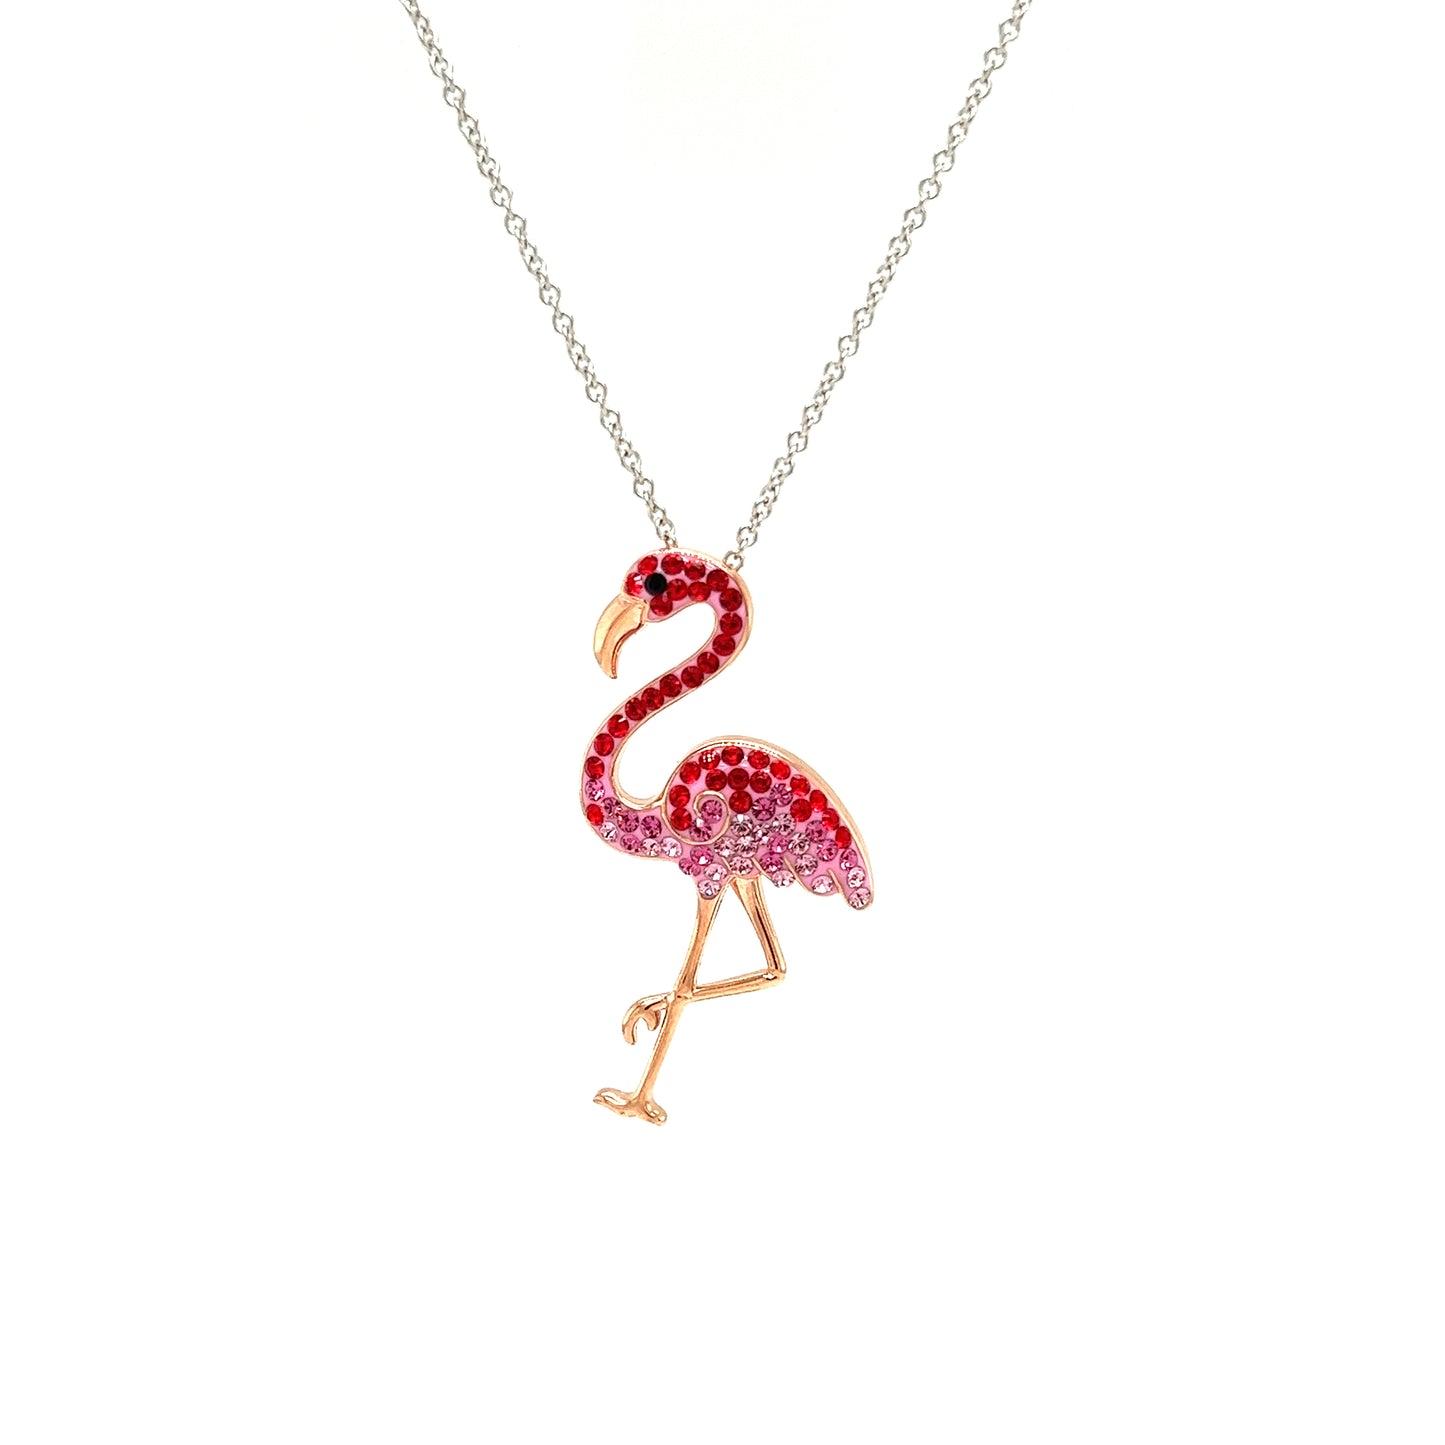 Flamingo Necklace with Red and Pink Crystals and Rose Gold Plating in Sterling Silver Necklace Front View